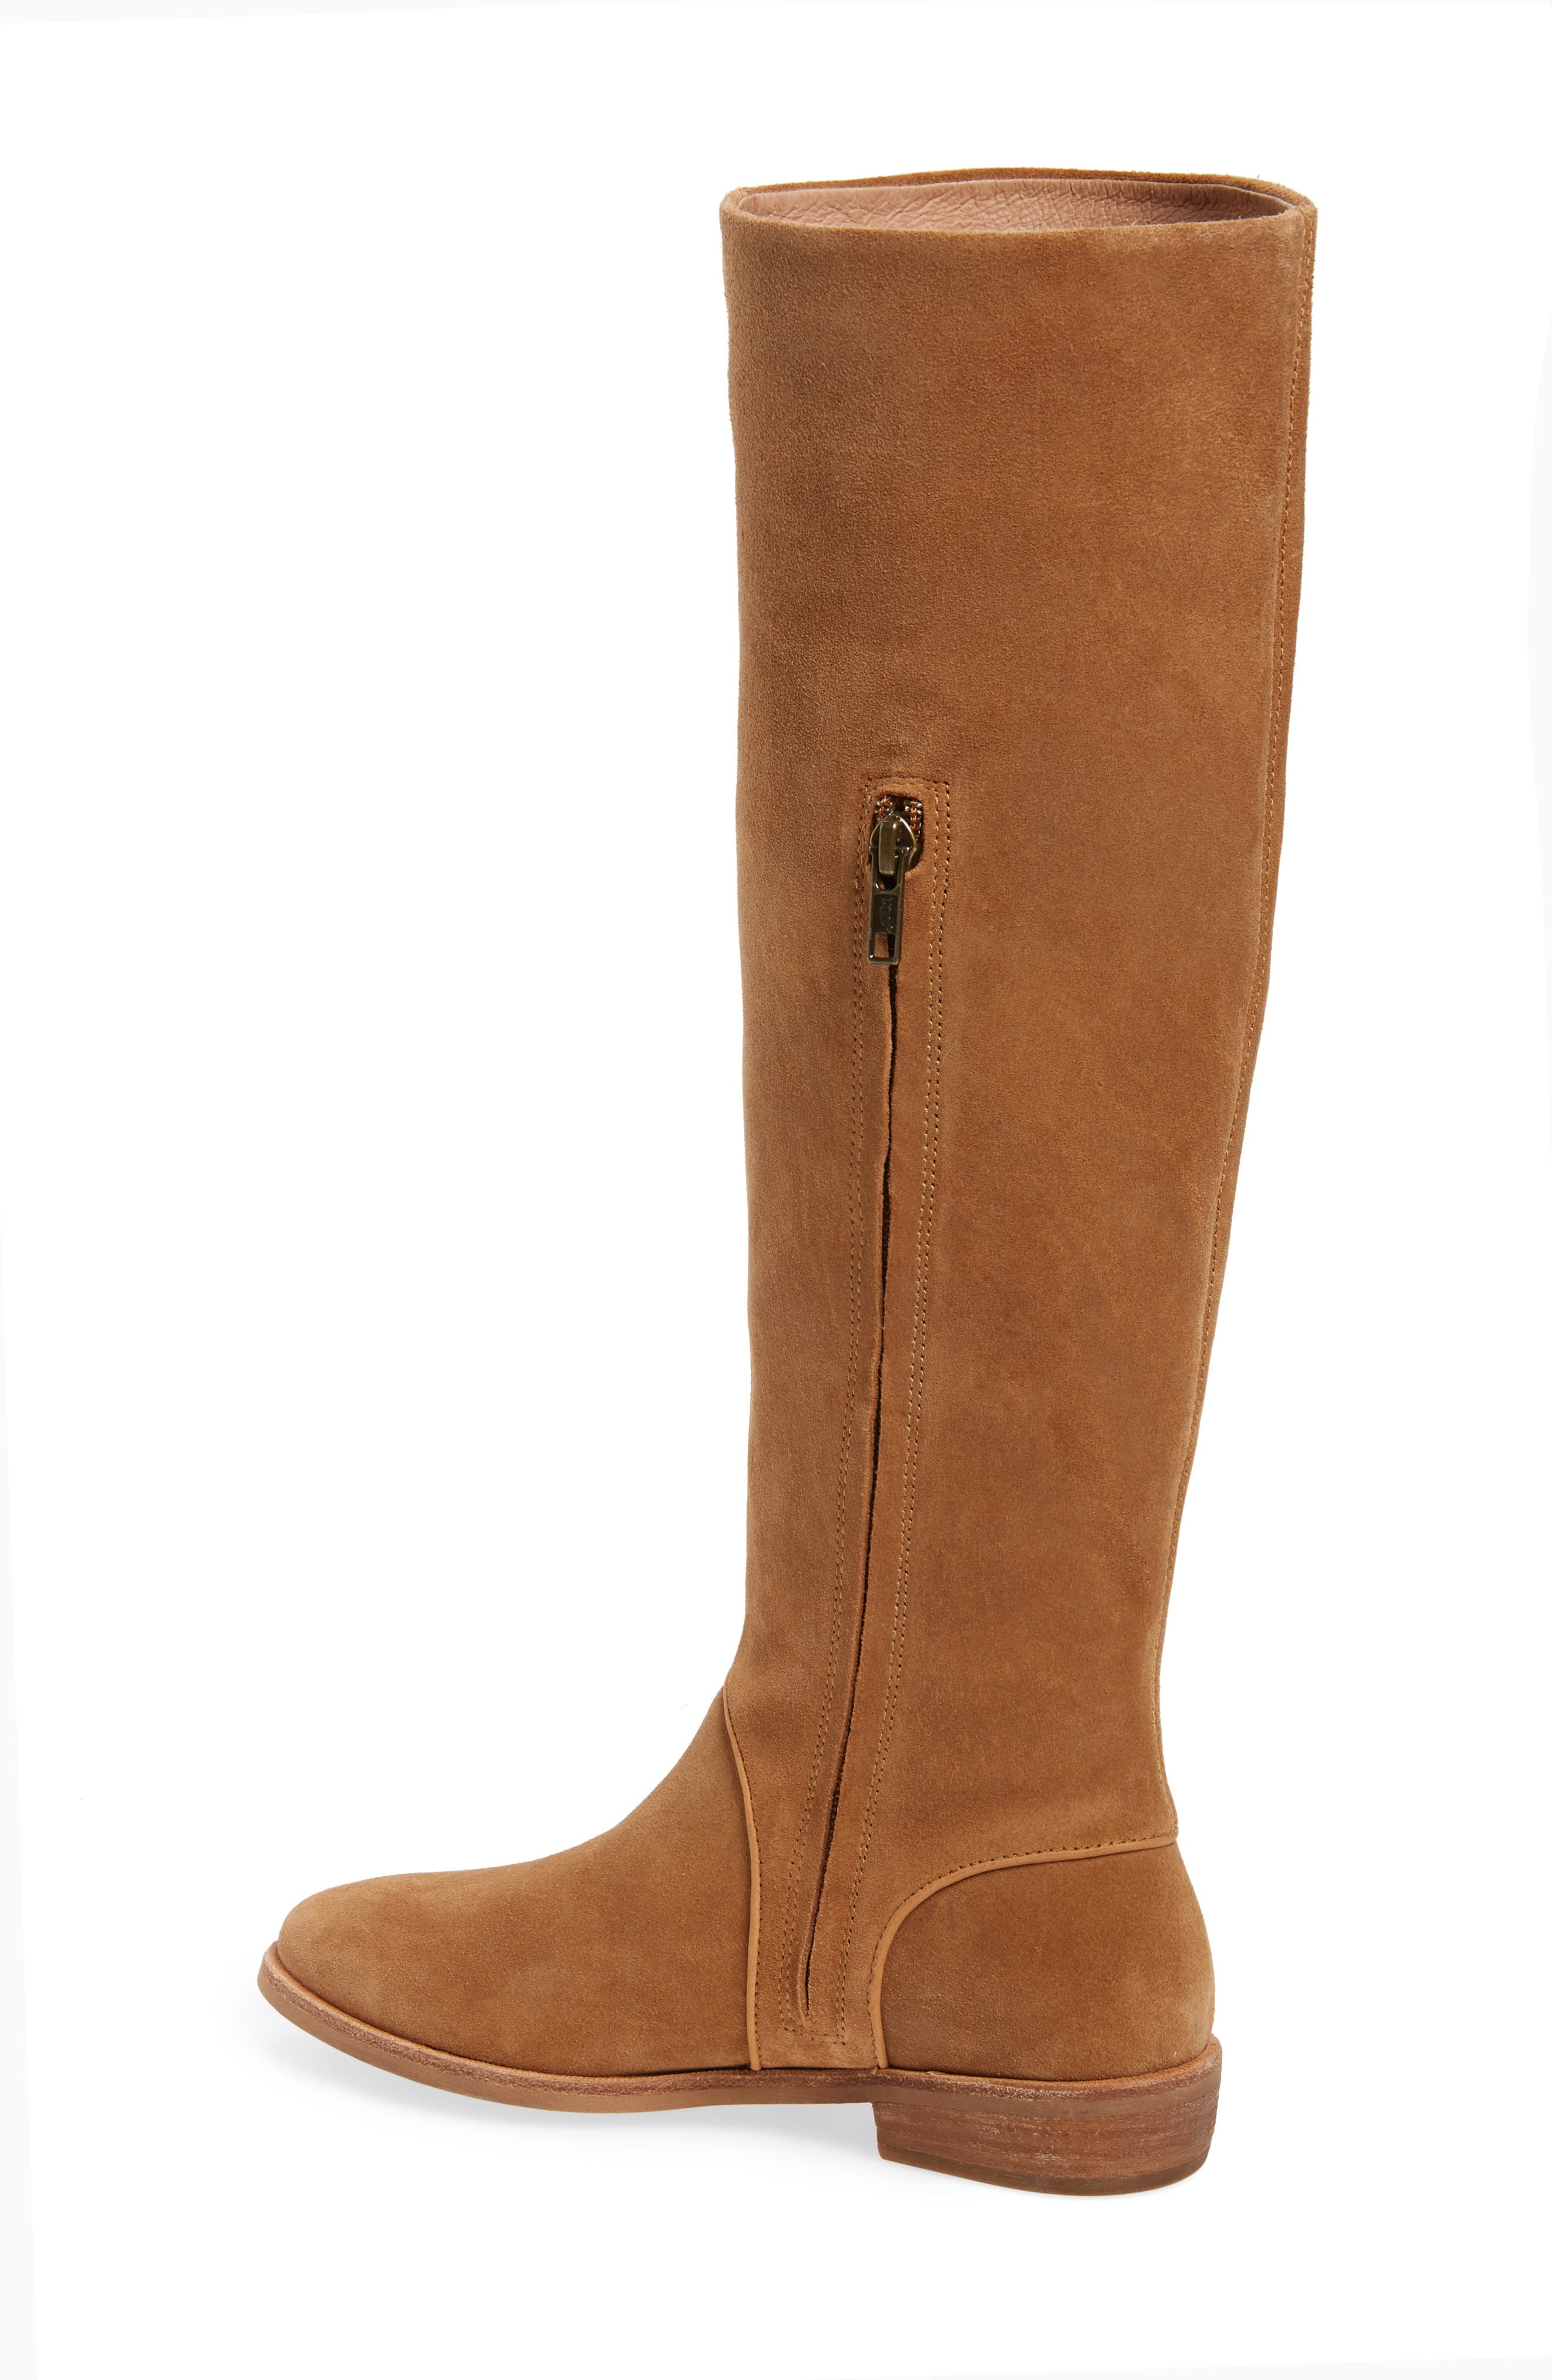 ugg daley tall boot